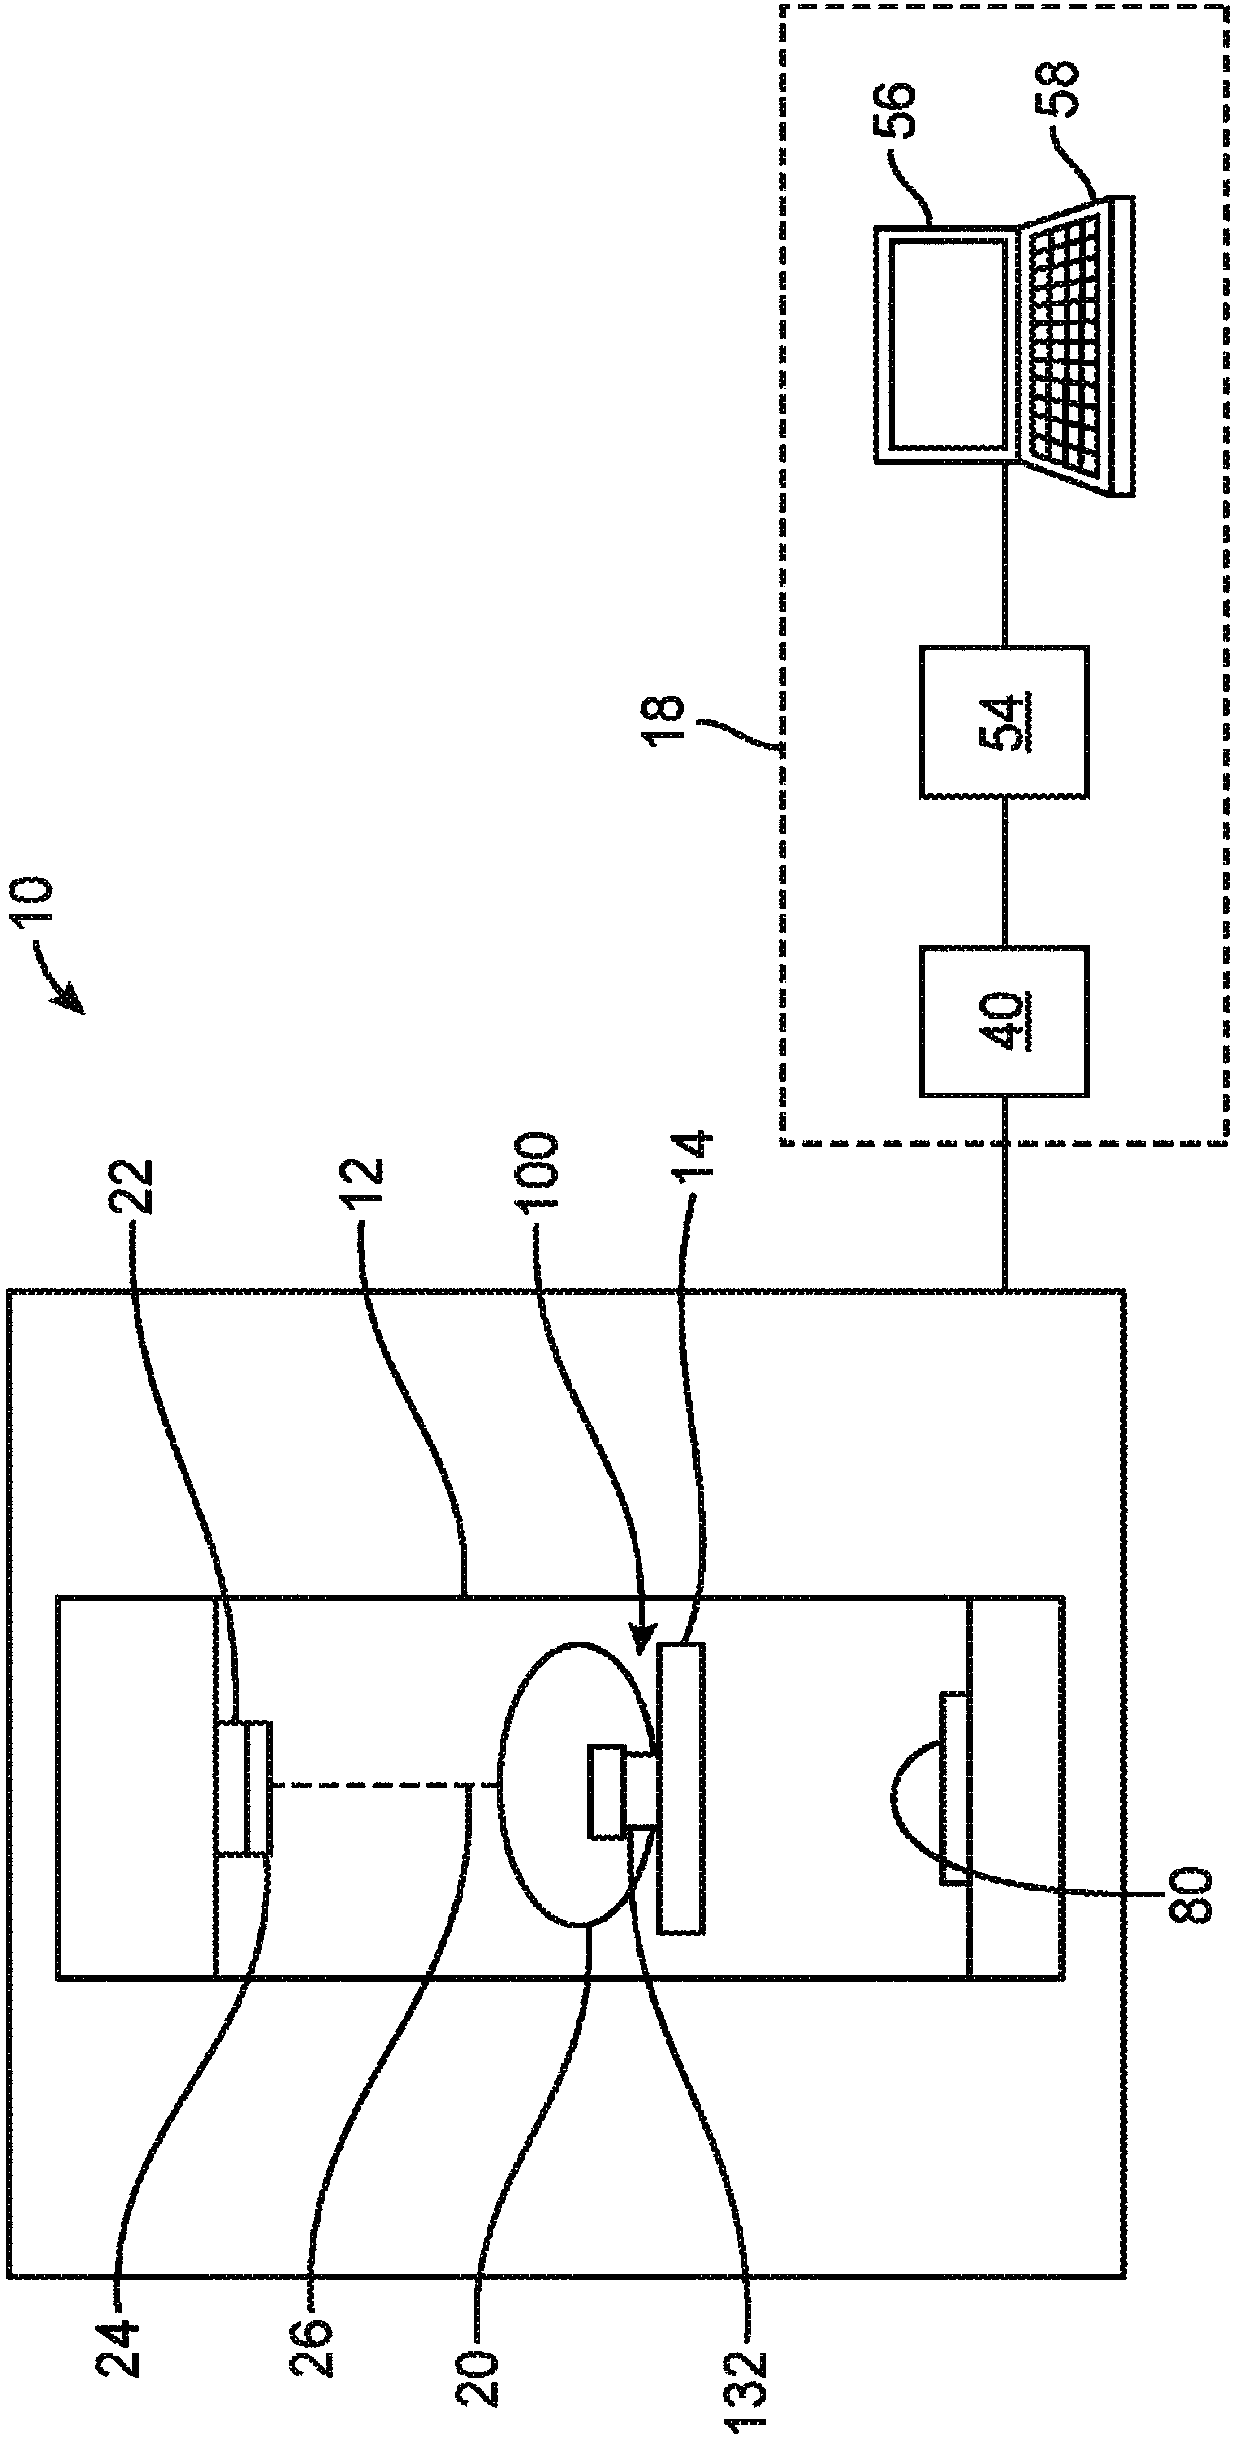 Electromagnetic interference containment for accelerator systems